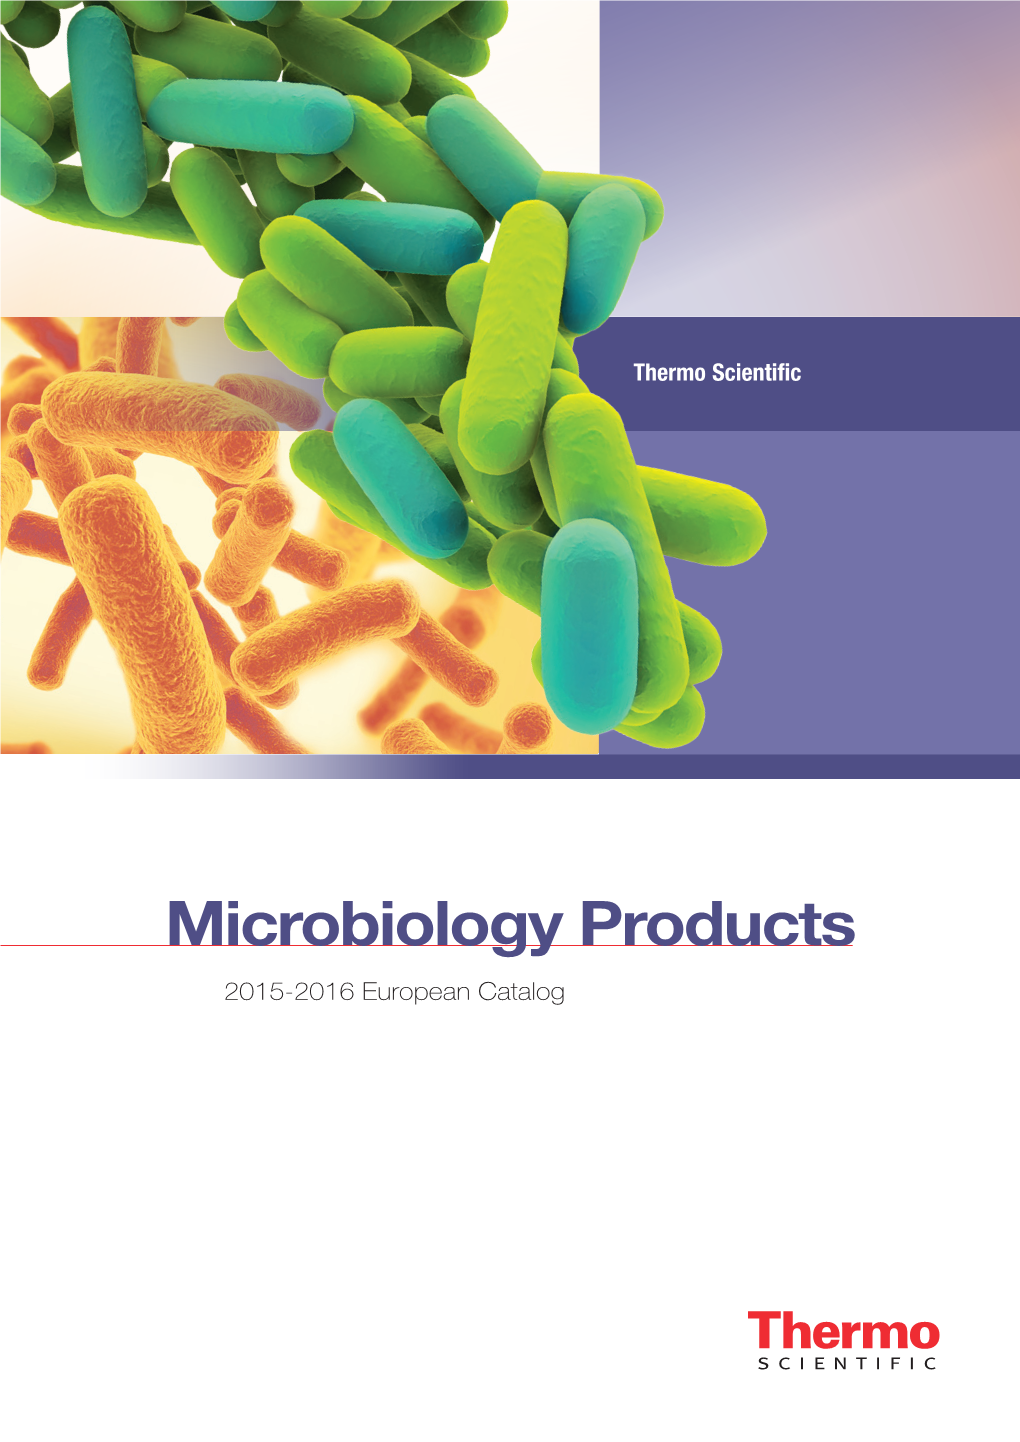 Microbiology Products 2015-2016 European Catalog HOW to ORDER